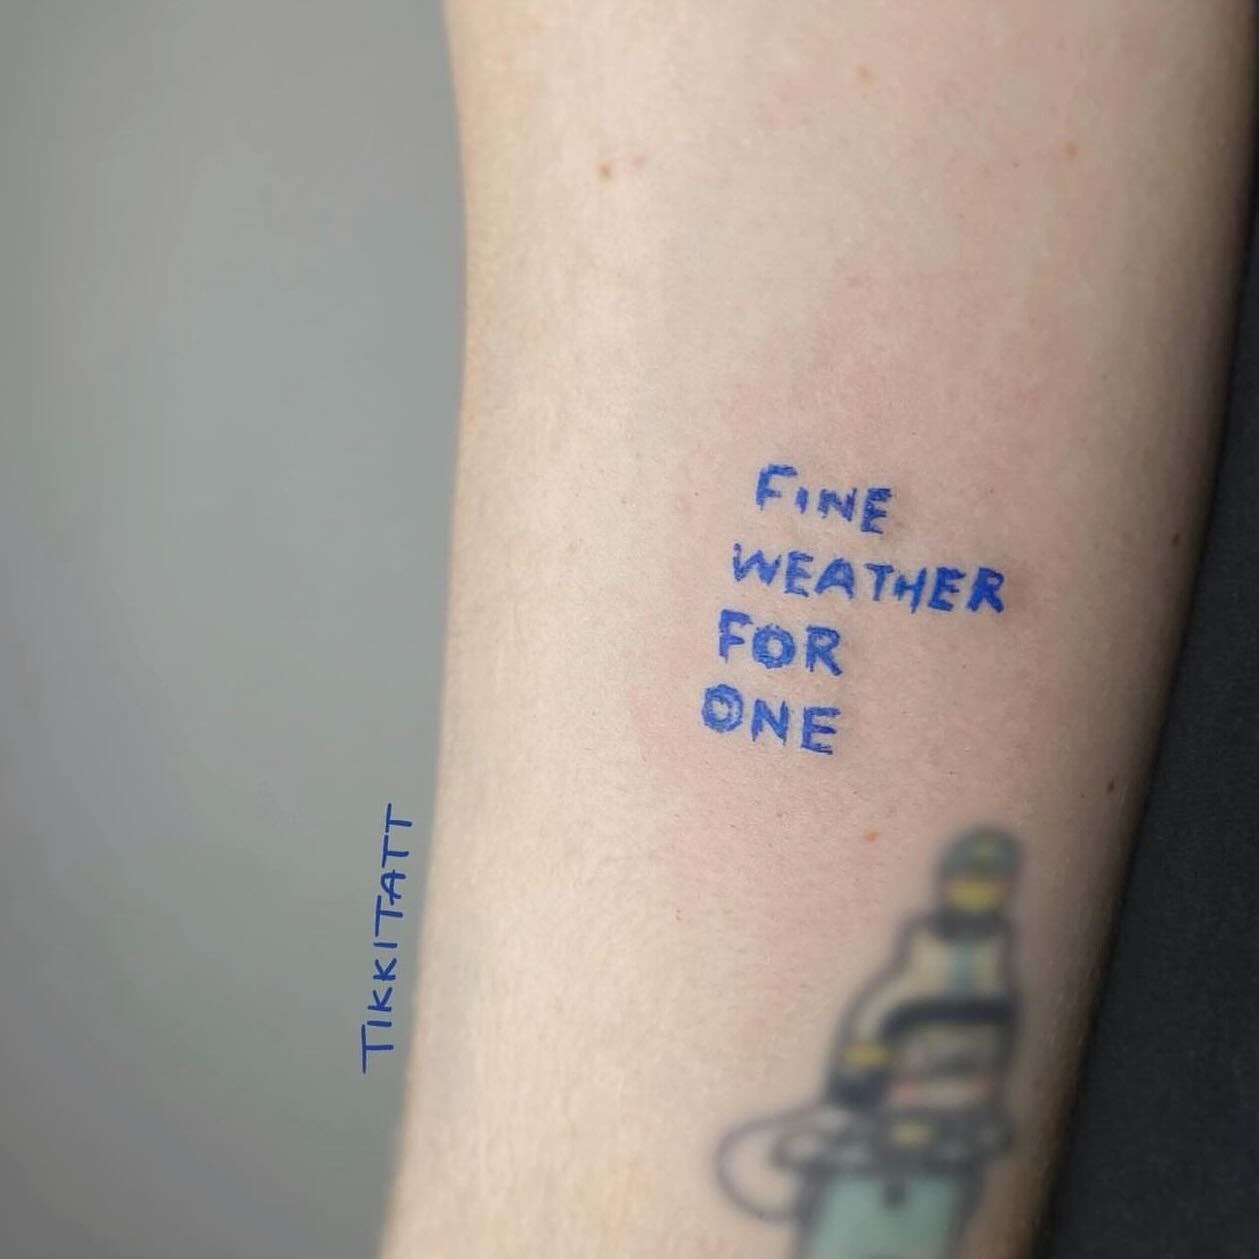 &ldquo;Fine weather for one &ldquo;🌞
Apprentice work: @tikkitatt 
________________________________________________
[At Off the Ground Ink, we bring your tattoo ideas to life! 💭 For bookings and inquiries, reach out to us by email at offthegroundink